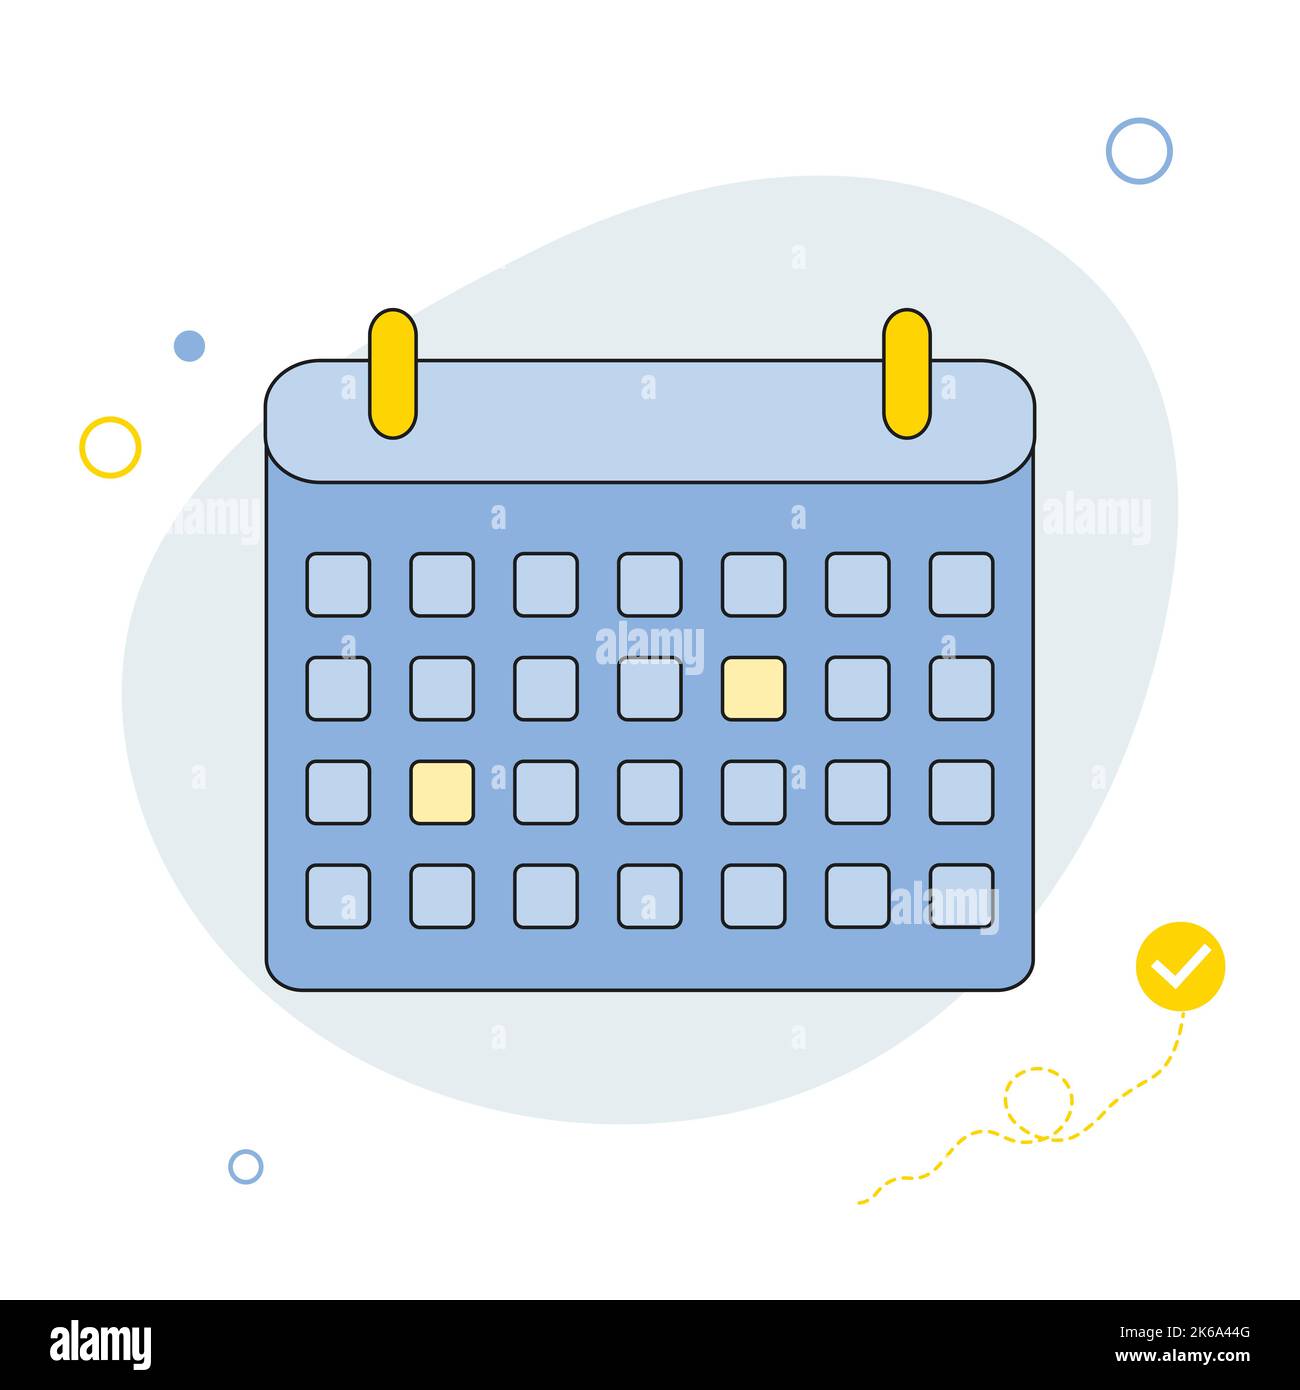 Calendar flat icon. Modern concept for business planning, news and events, reminder and timetable. Vector illustration Stock Vector